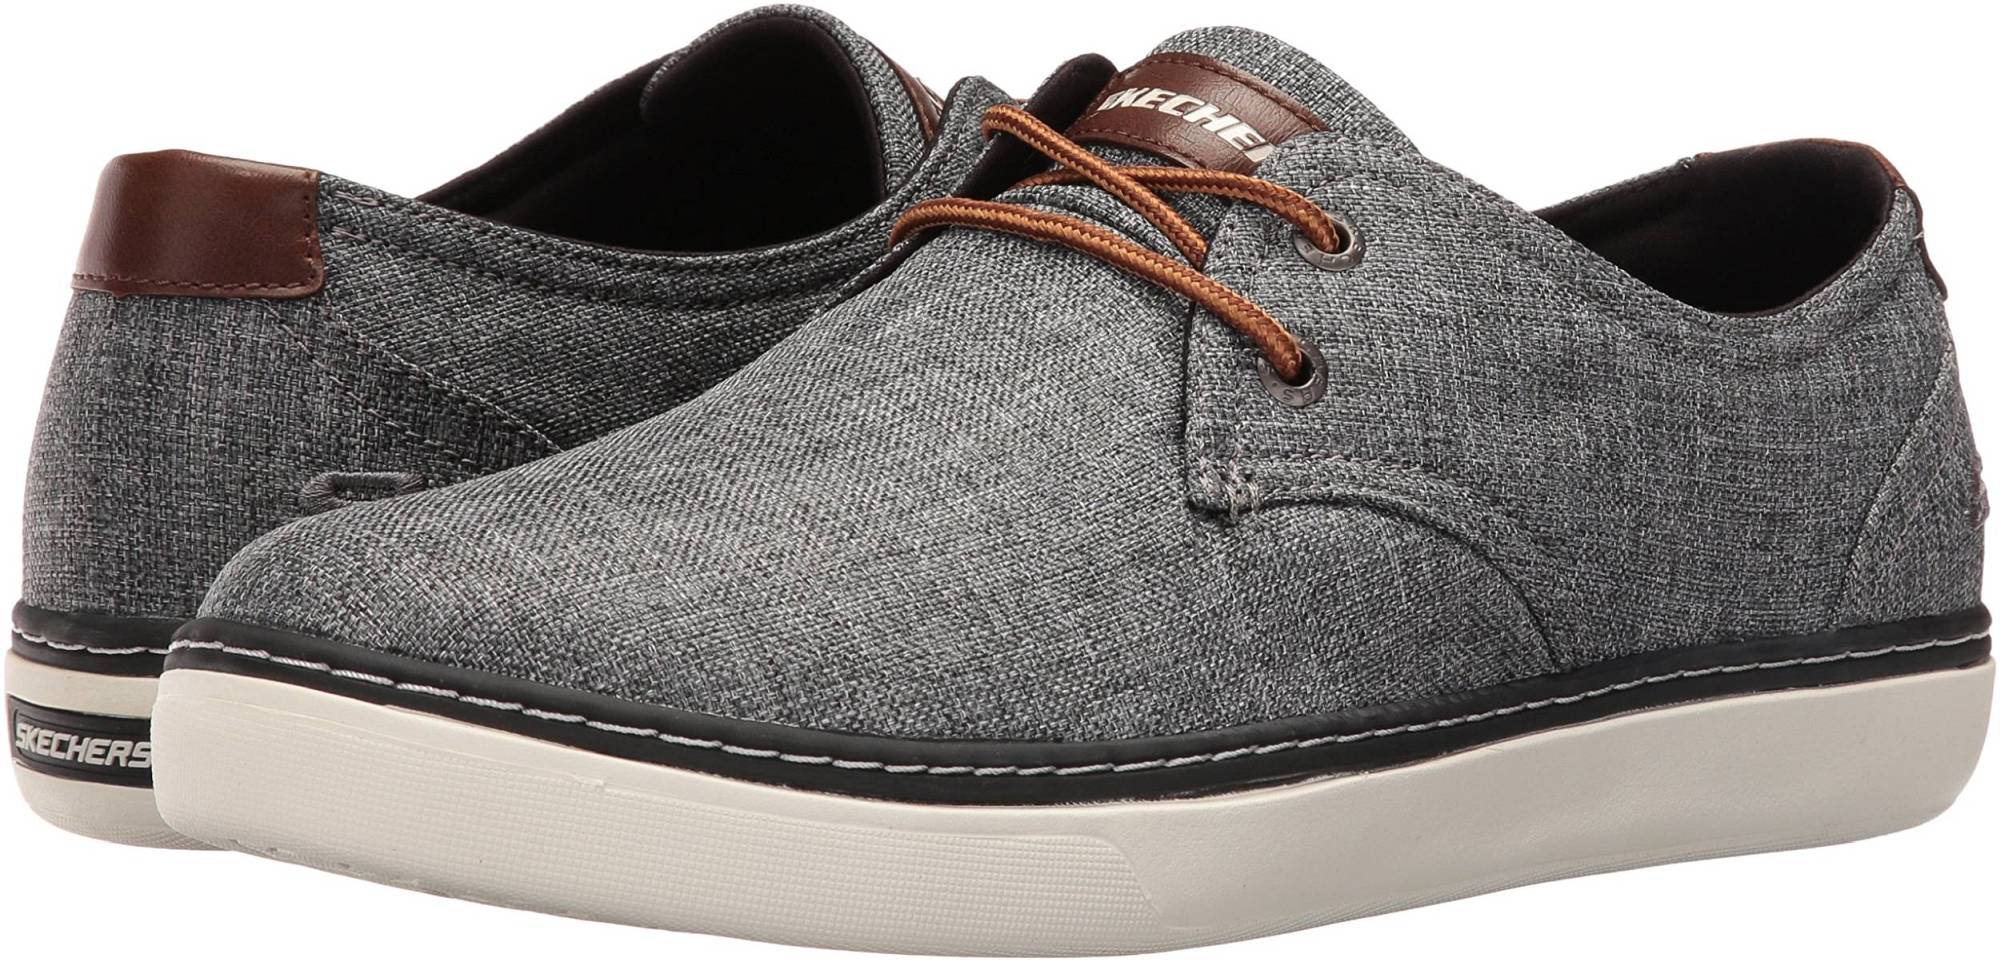 Skechers Relaxed Fit: Palen - Gadon – Shoes Reviews & Reasons To Buy